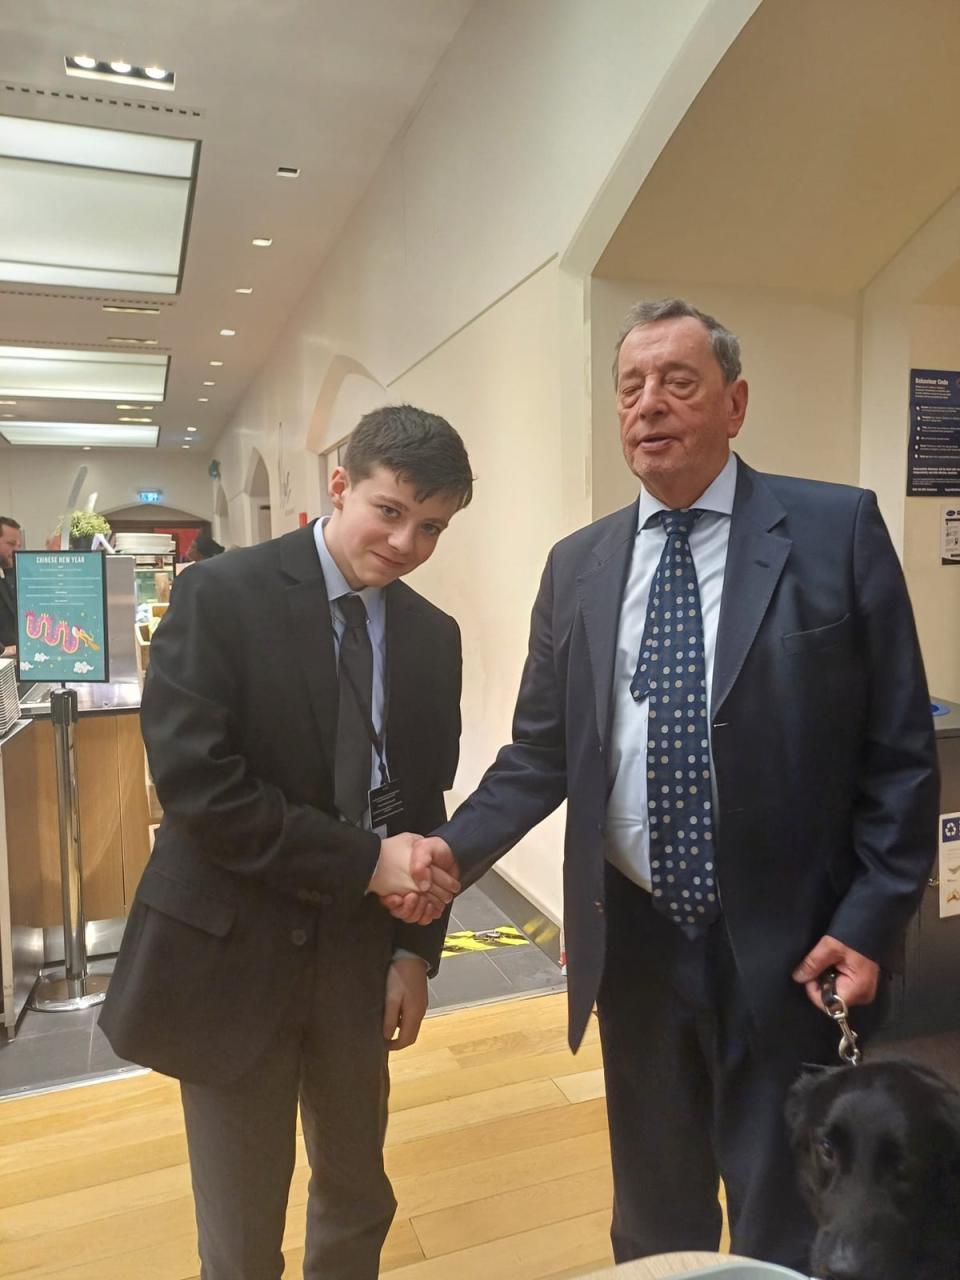 Kayden pictured with Blunkett, who helped win the right for him to visit his father in prison (Margaret White)